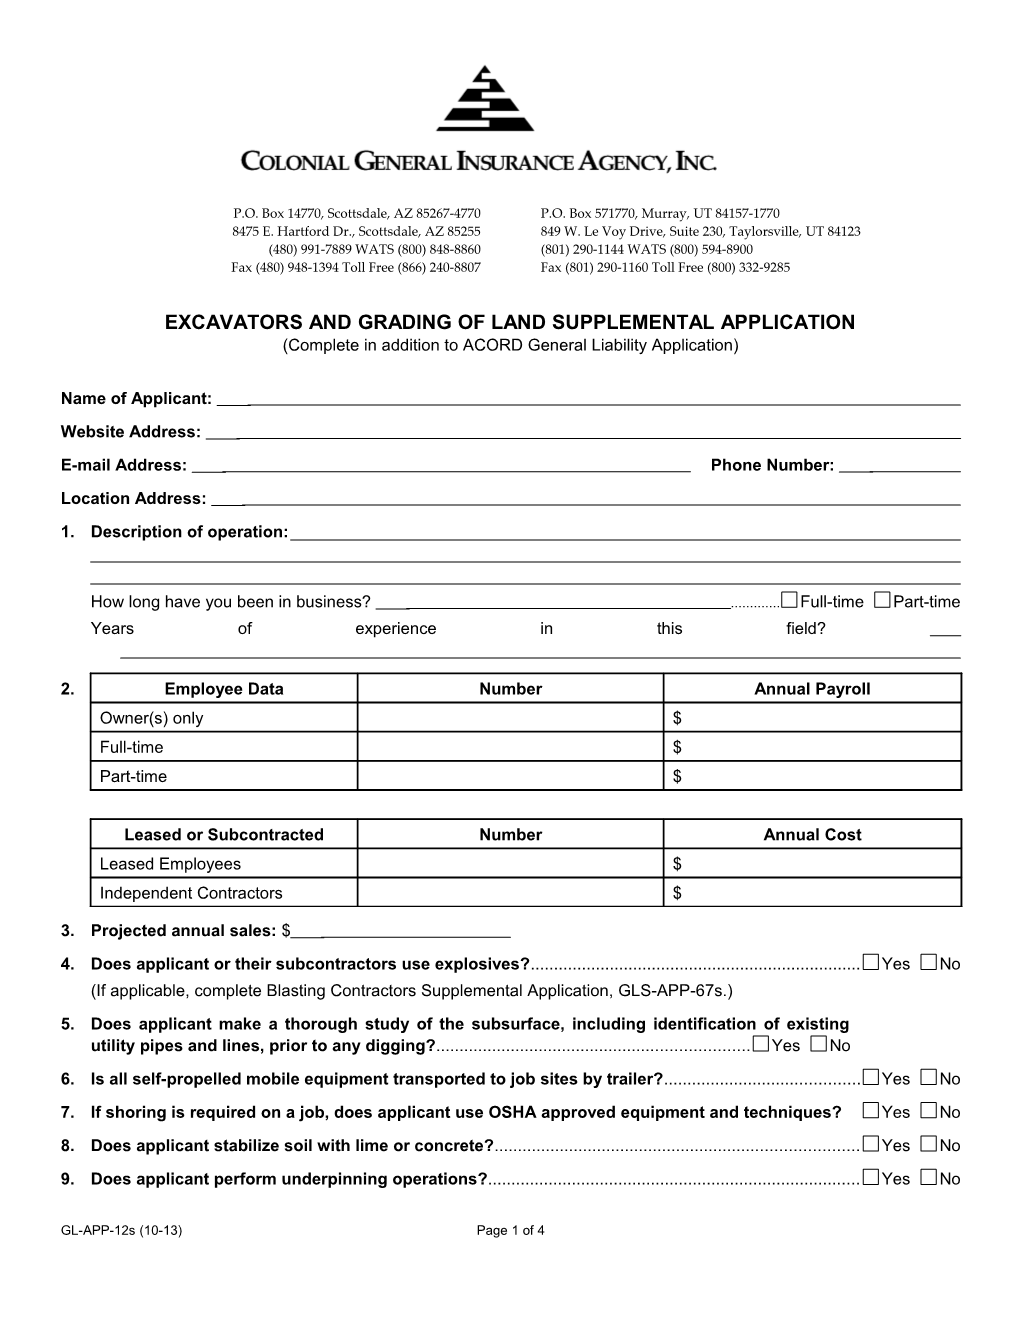 Excavators and Grading of Land Supplemental Application